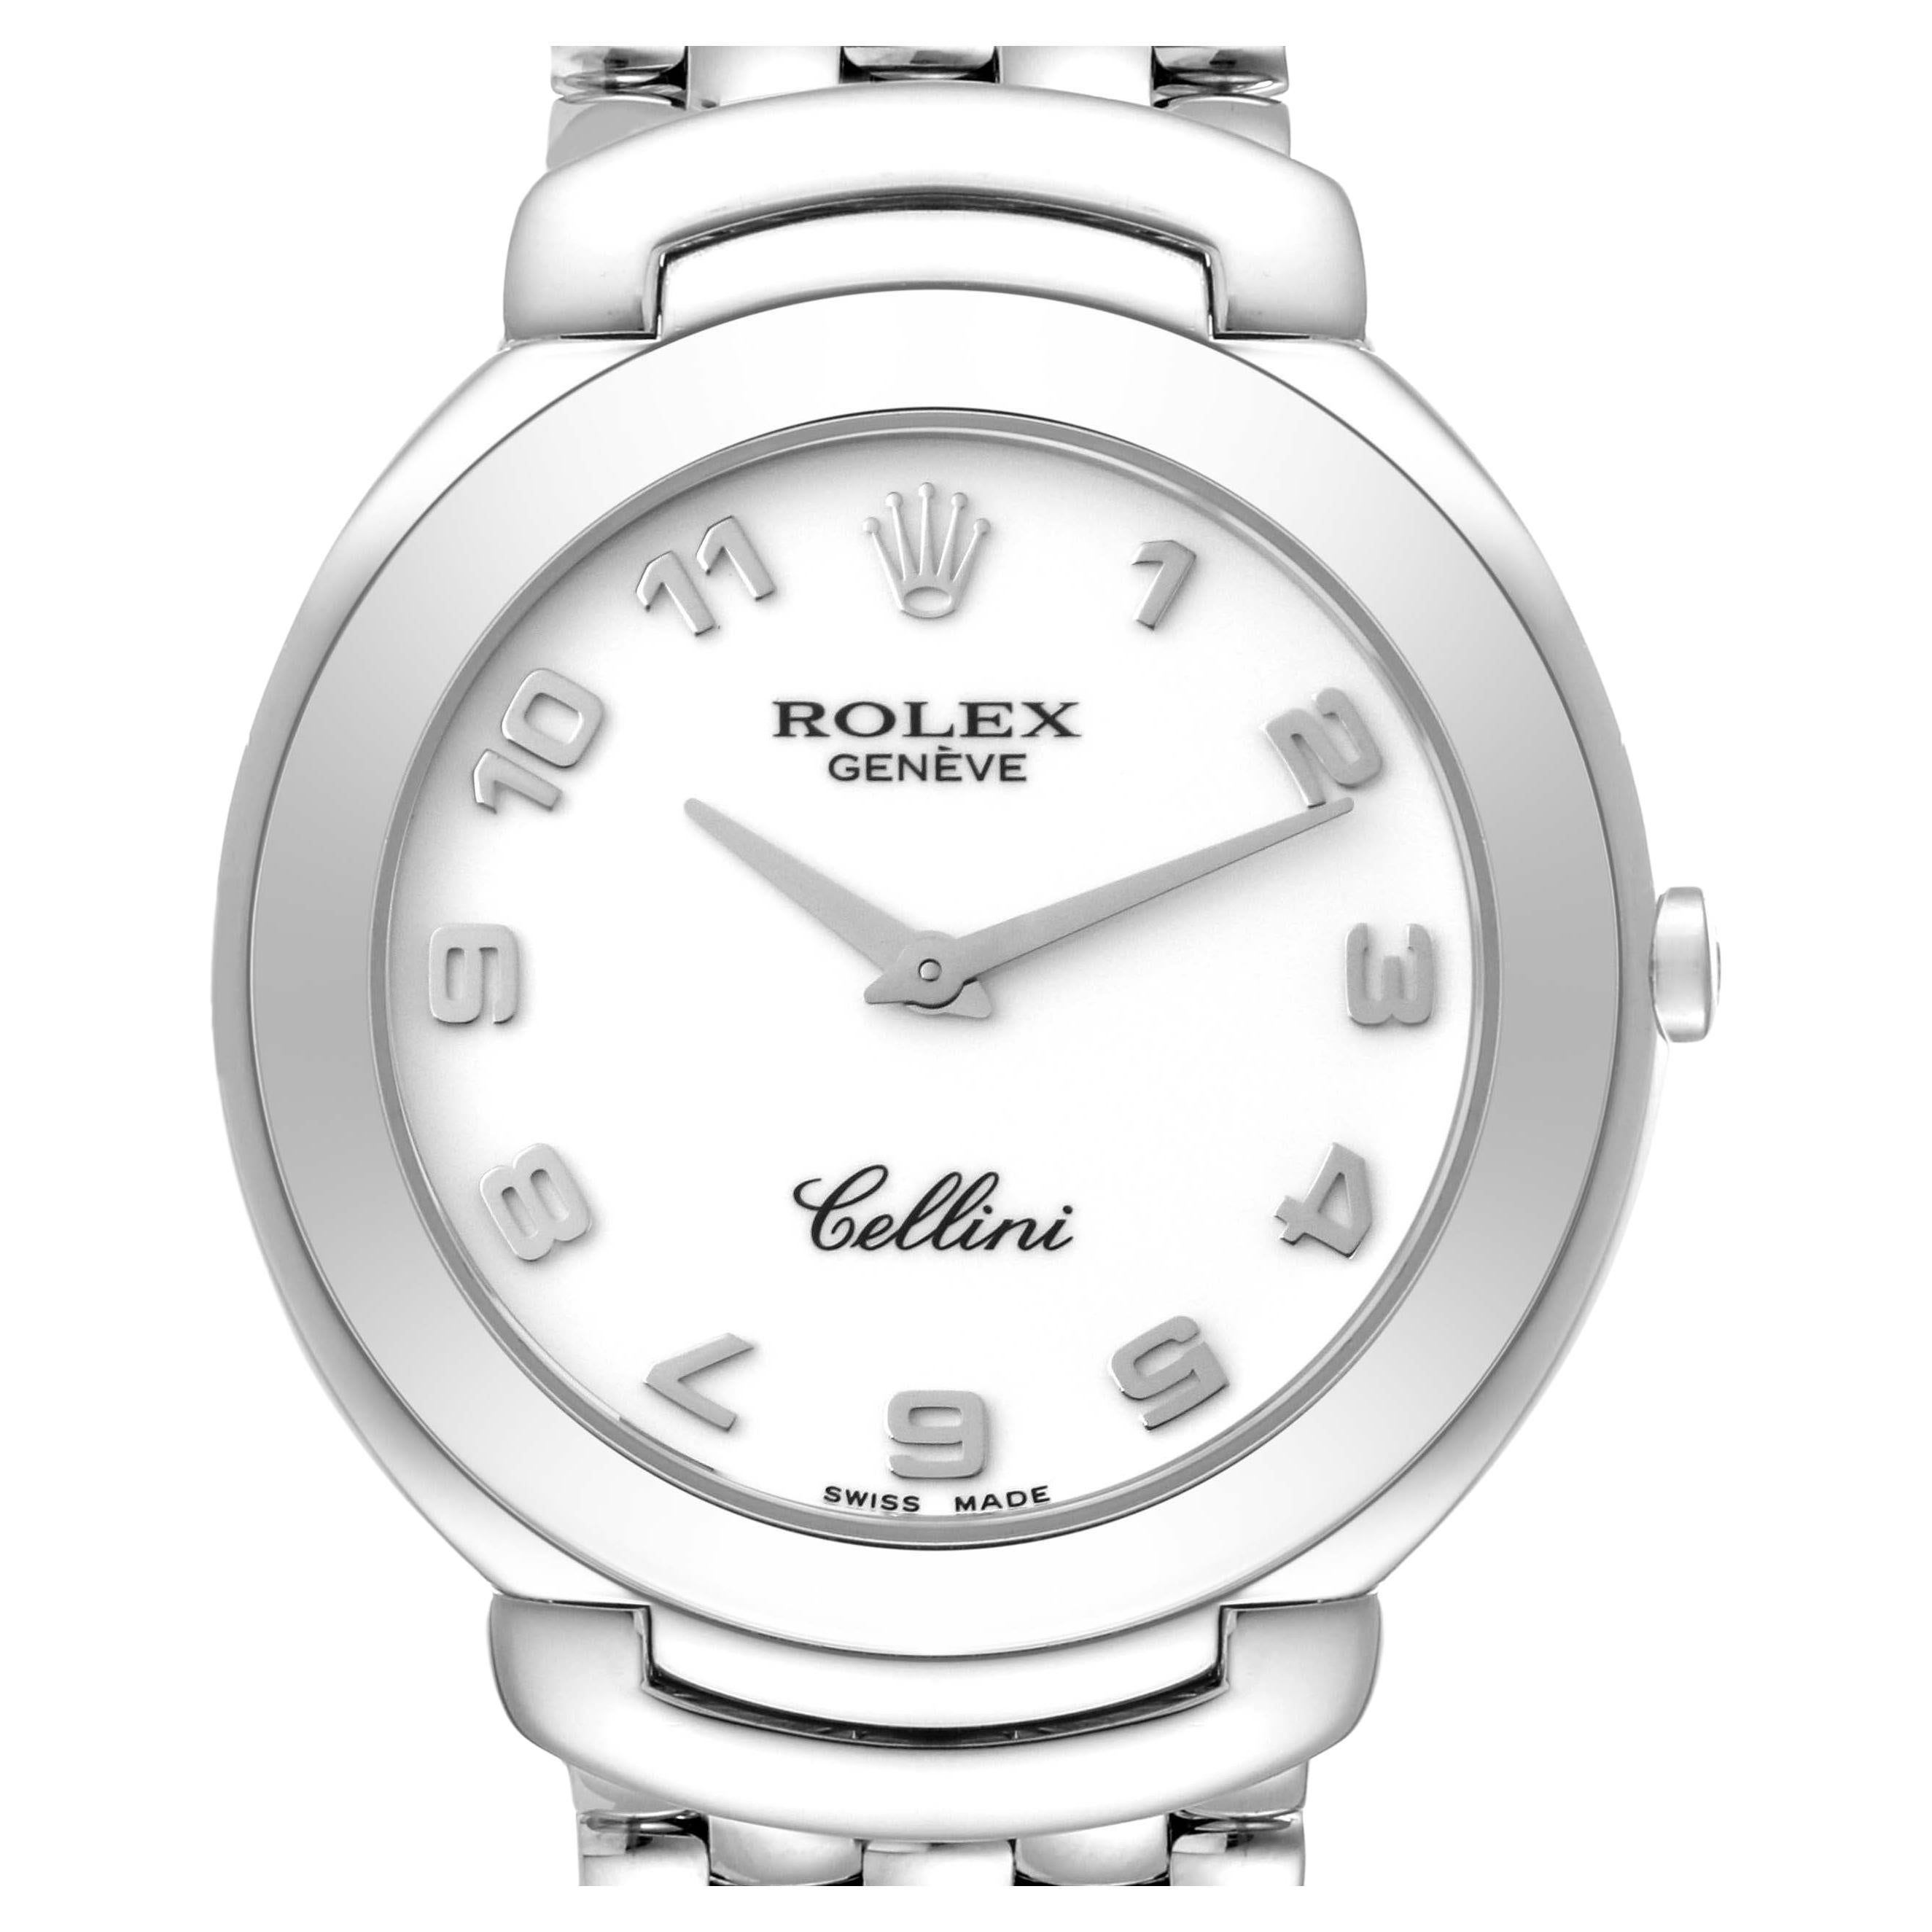 Rolex Cellini 18K White Gold Mens Watch 6623 For Sale